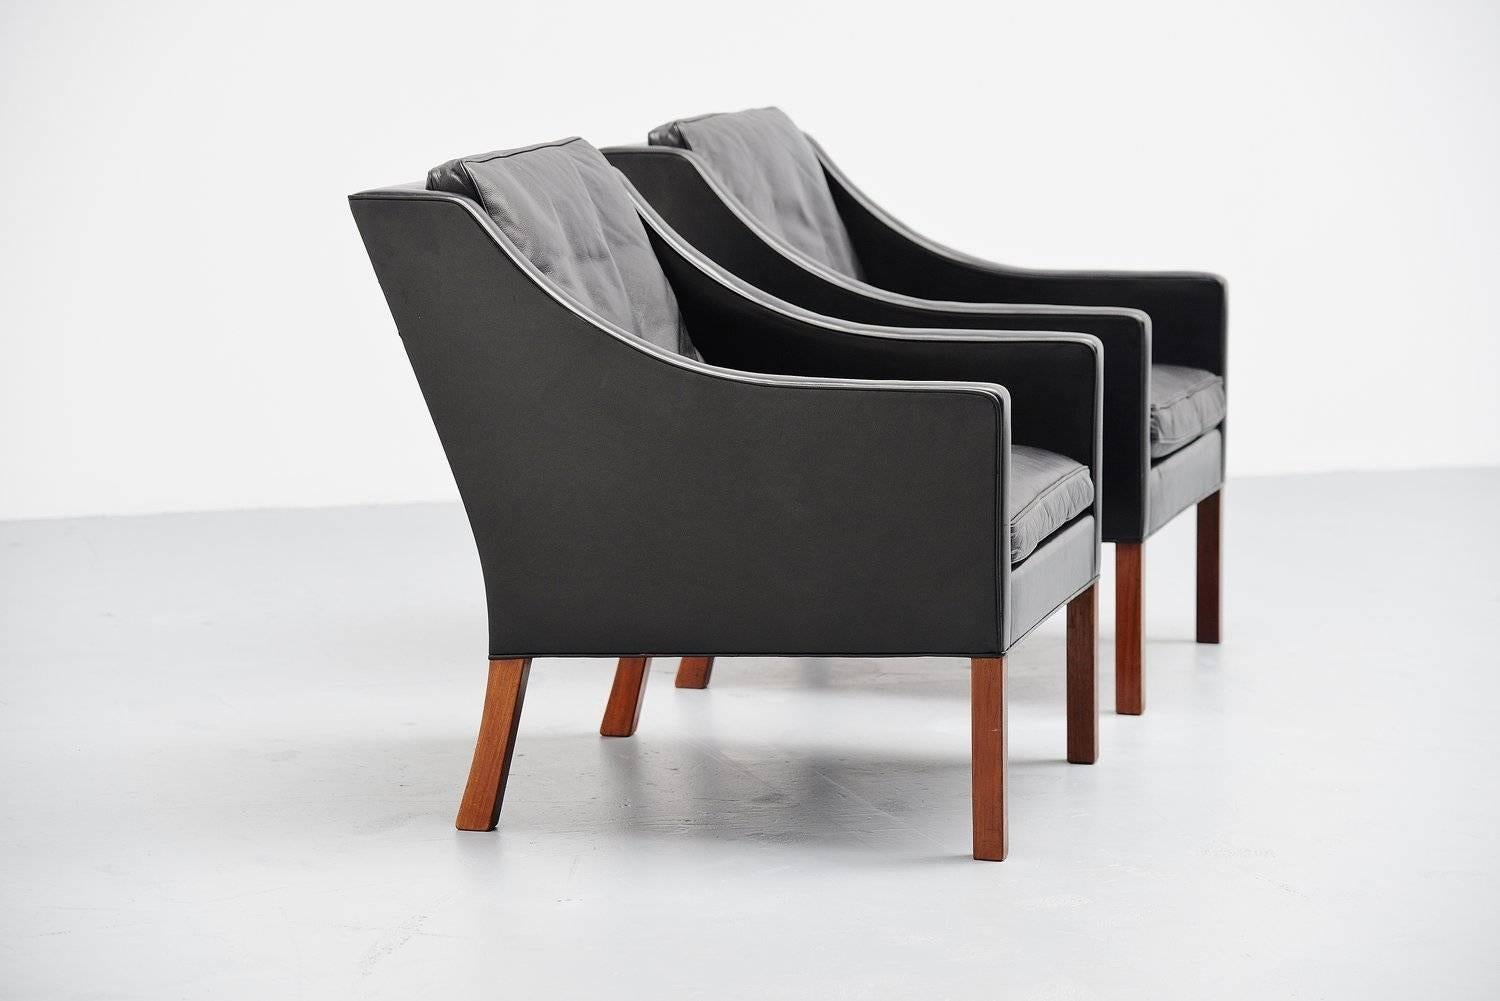 Excellent pair of lounge chairs designed by Borge Mogensen for Fredericia Stolefabrik, Denmark 1963. These chairs have high quality black leather upholstery and solid teak legs. The chairs are in very good original condition with very nice patina to